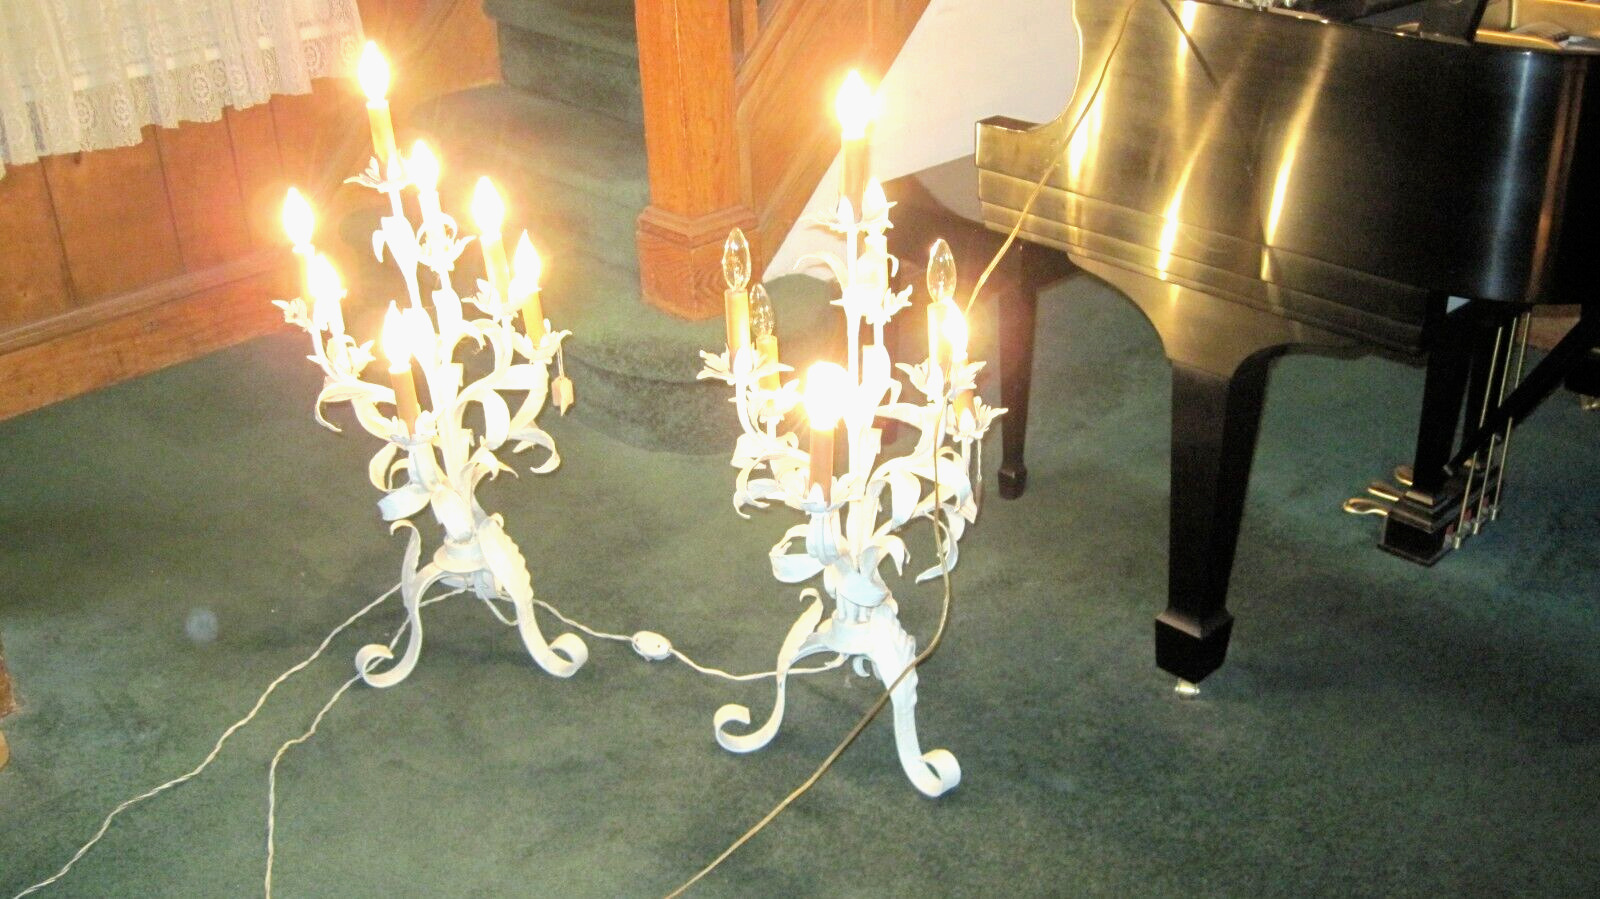 LIBERACE OWNED PAIR OF ITALIAN ROCOCO CANDELABRA LAMPS FROM 1988 ESTATE AUCTION